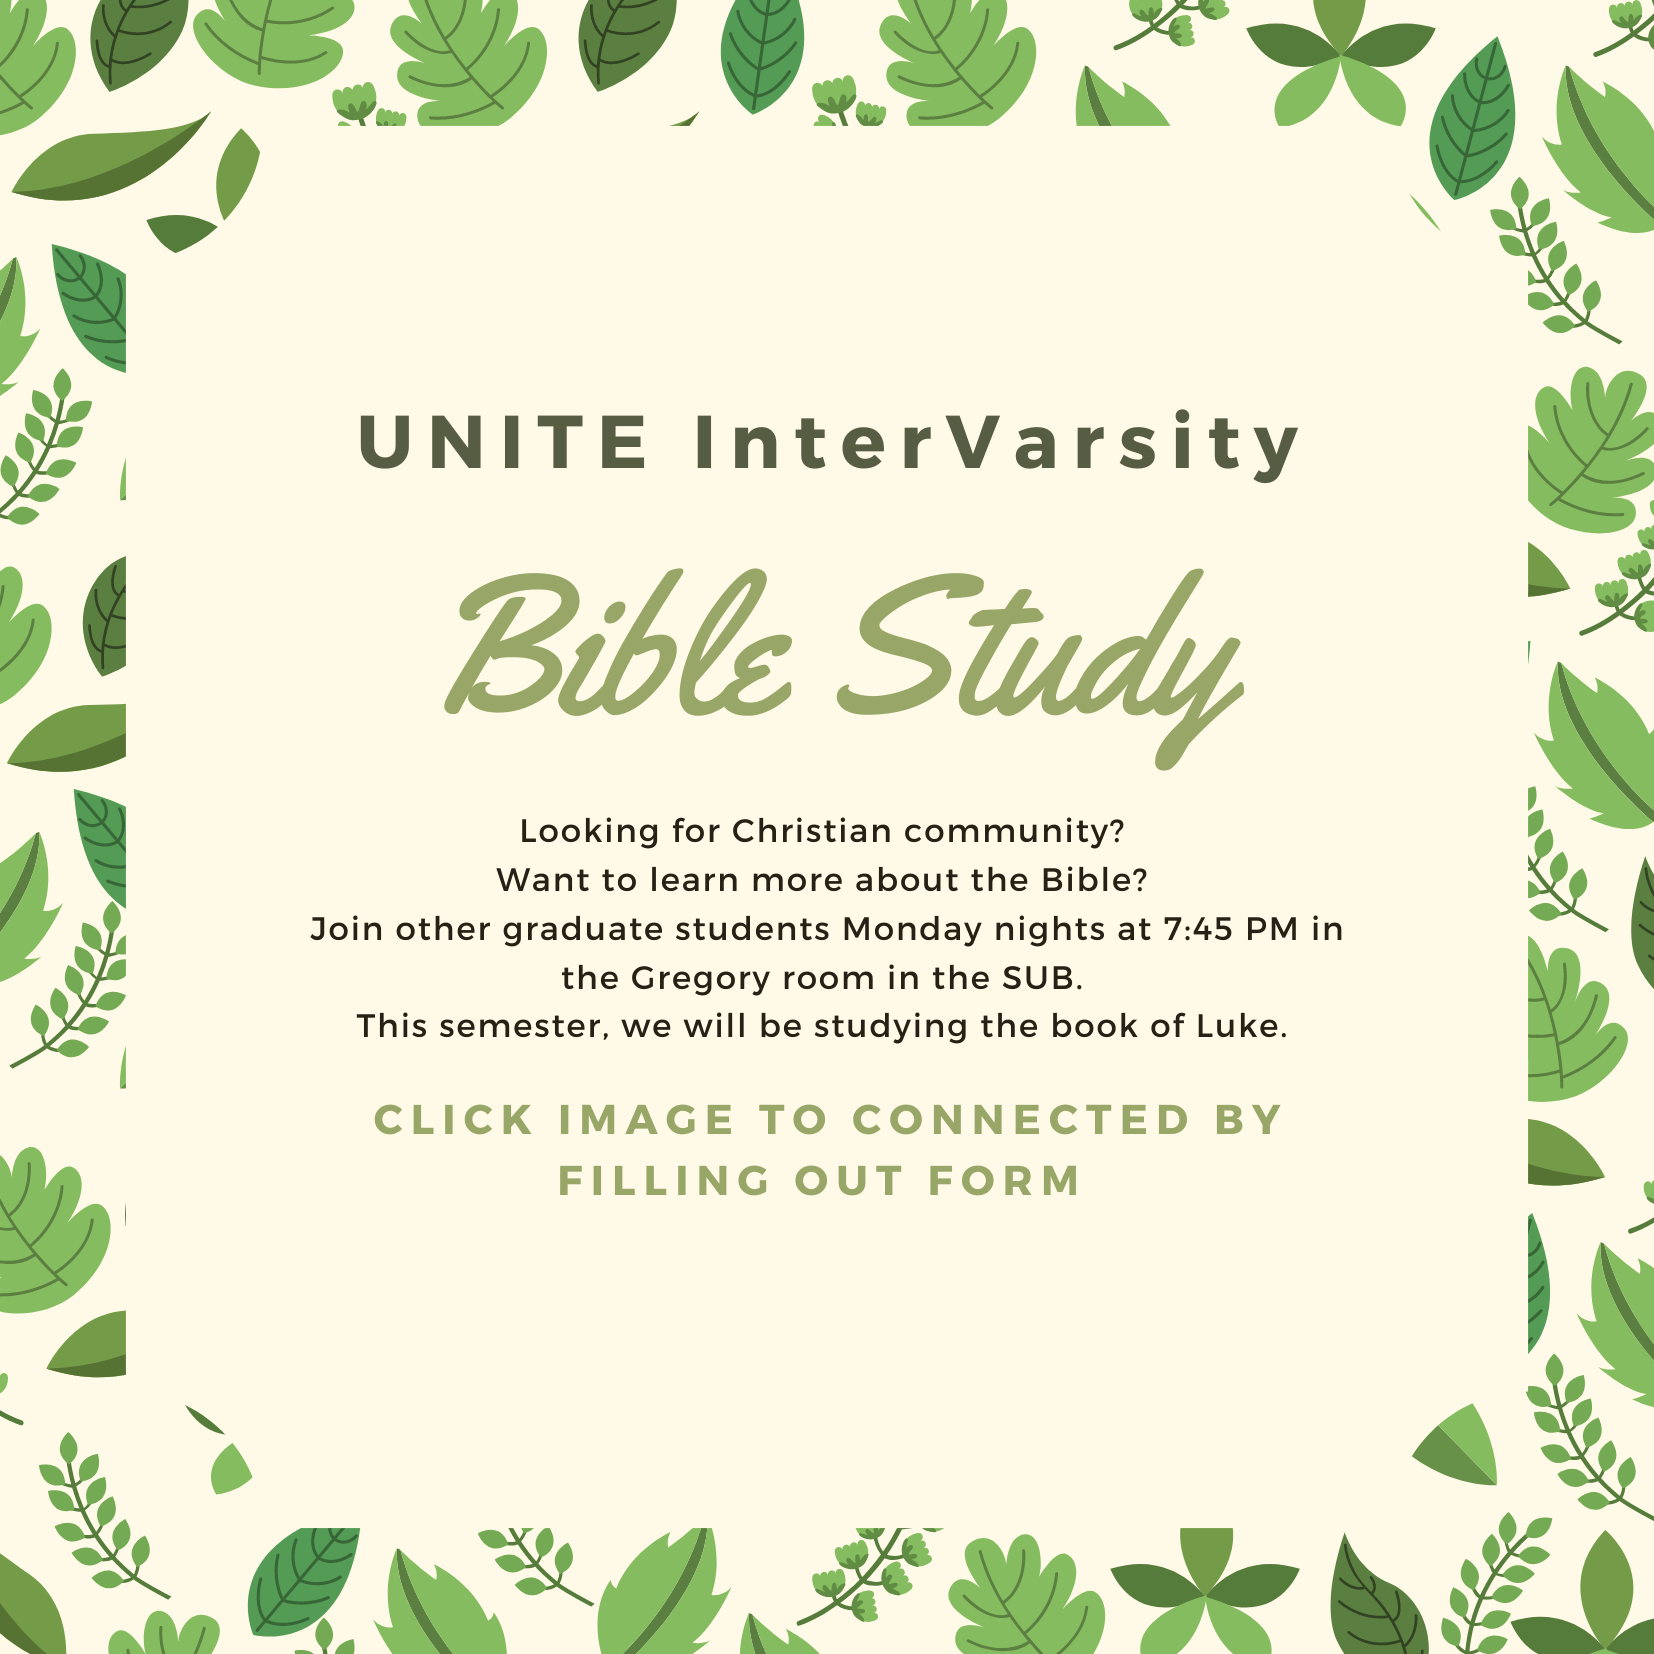 UNITE InterVarsity Bible Study Looking for Christian community? Want to learn more about the Bible? Join other graduate students Monday nights at 7:45 PM in the Gregory room in the SUB. This semester, we will be studying the book of Luke. Click Image, fill out form to connect. 